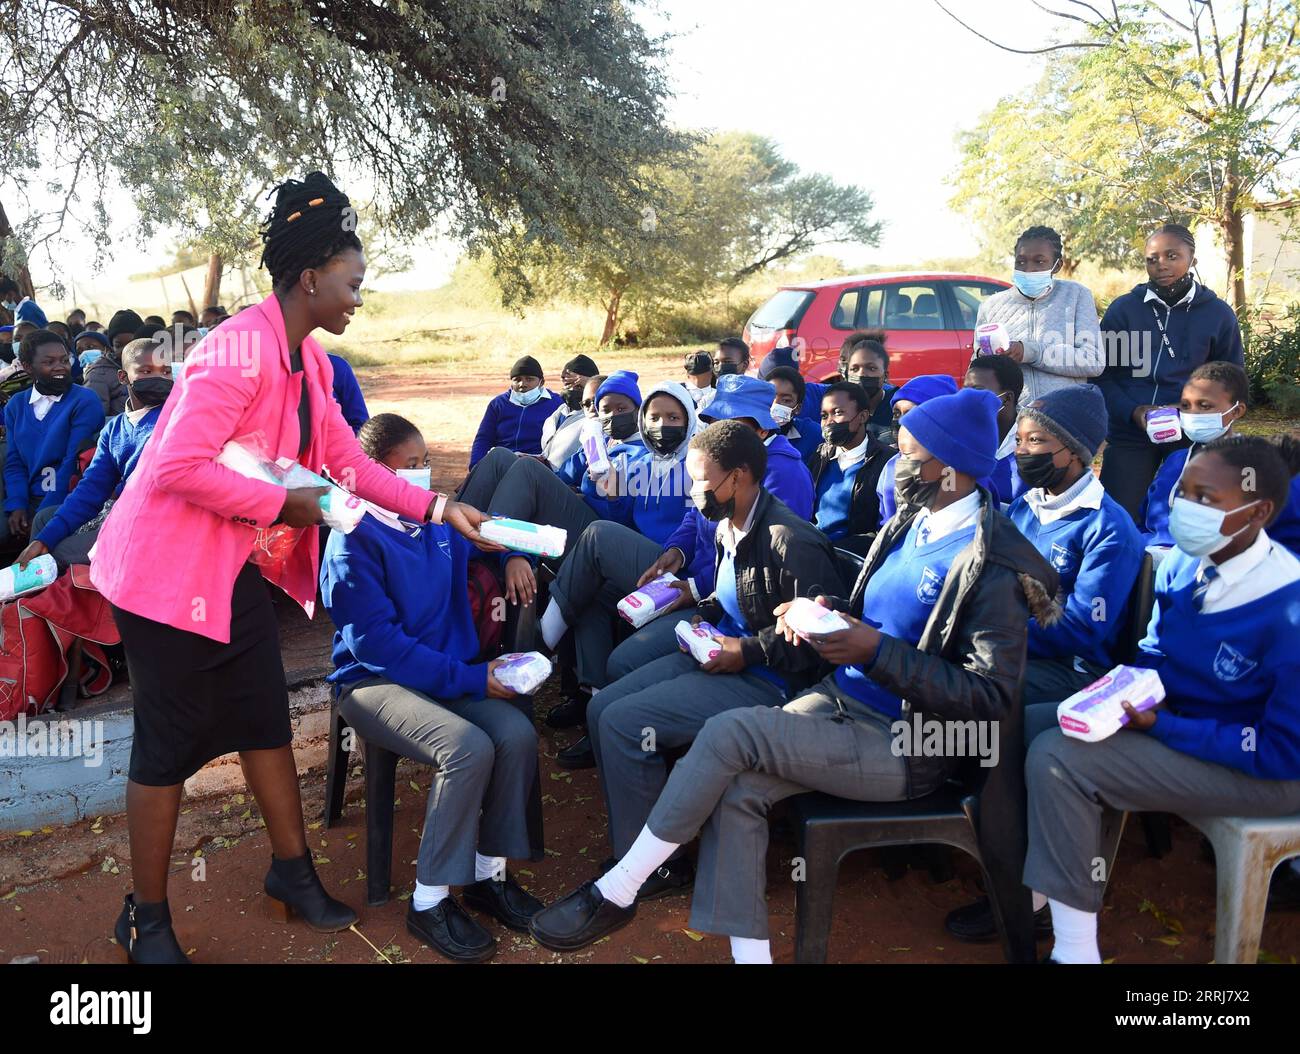 220715 -- MOCHUDI BOTSWANA, July 15, 2022 -- Agrieneth Masule L, Front, who runs a feminine hygiene project that raises funds for sanitary pads given to needy girls through Motlaletsi Charity Club, distributes sanitary pads to students at Kgamanyane Community Junior Secondary School in Mochudi, a village in Kgatleng district, Botswana, on June 20, 2022. Period poverty, defined as a lack of access to menstrual products, education, and hygiene, causes one in every 10 African girls to miss school each year, according to the United Nations Children s Fund. Without proper education and resources, g Stock Photo